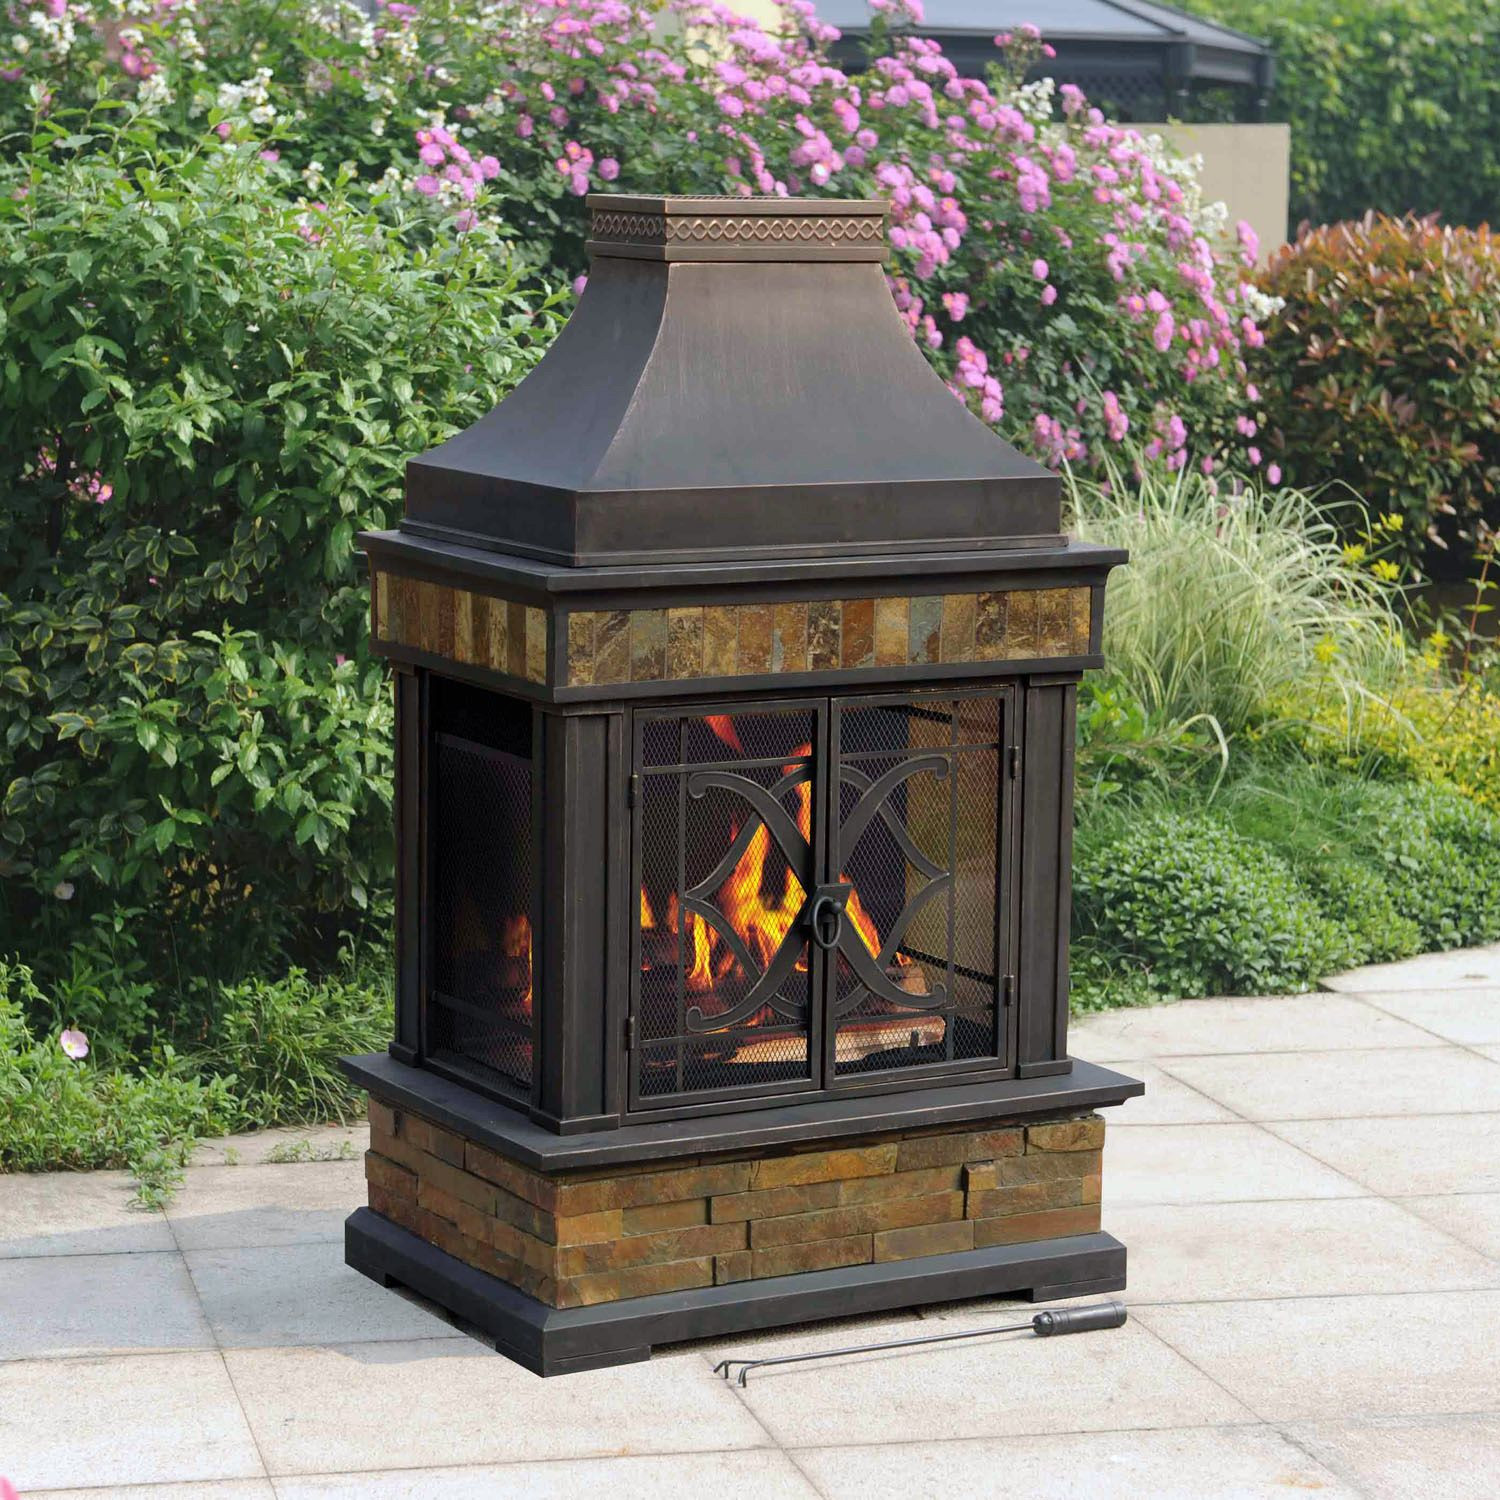 Outdoor Fireplace Or Fire Pit
 Chimney Outdoor Fire Pit